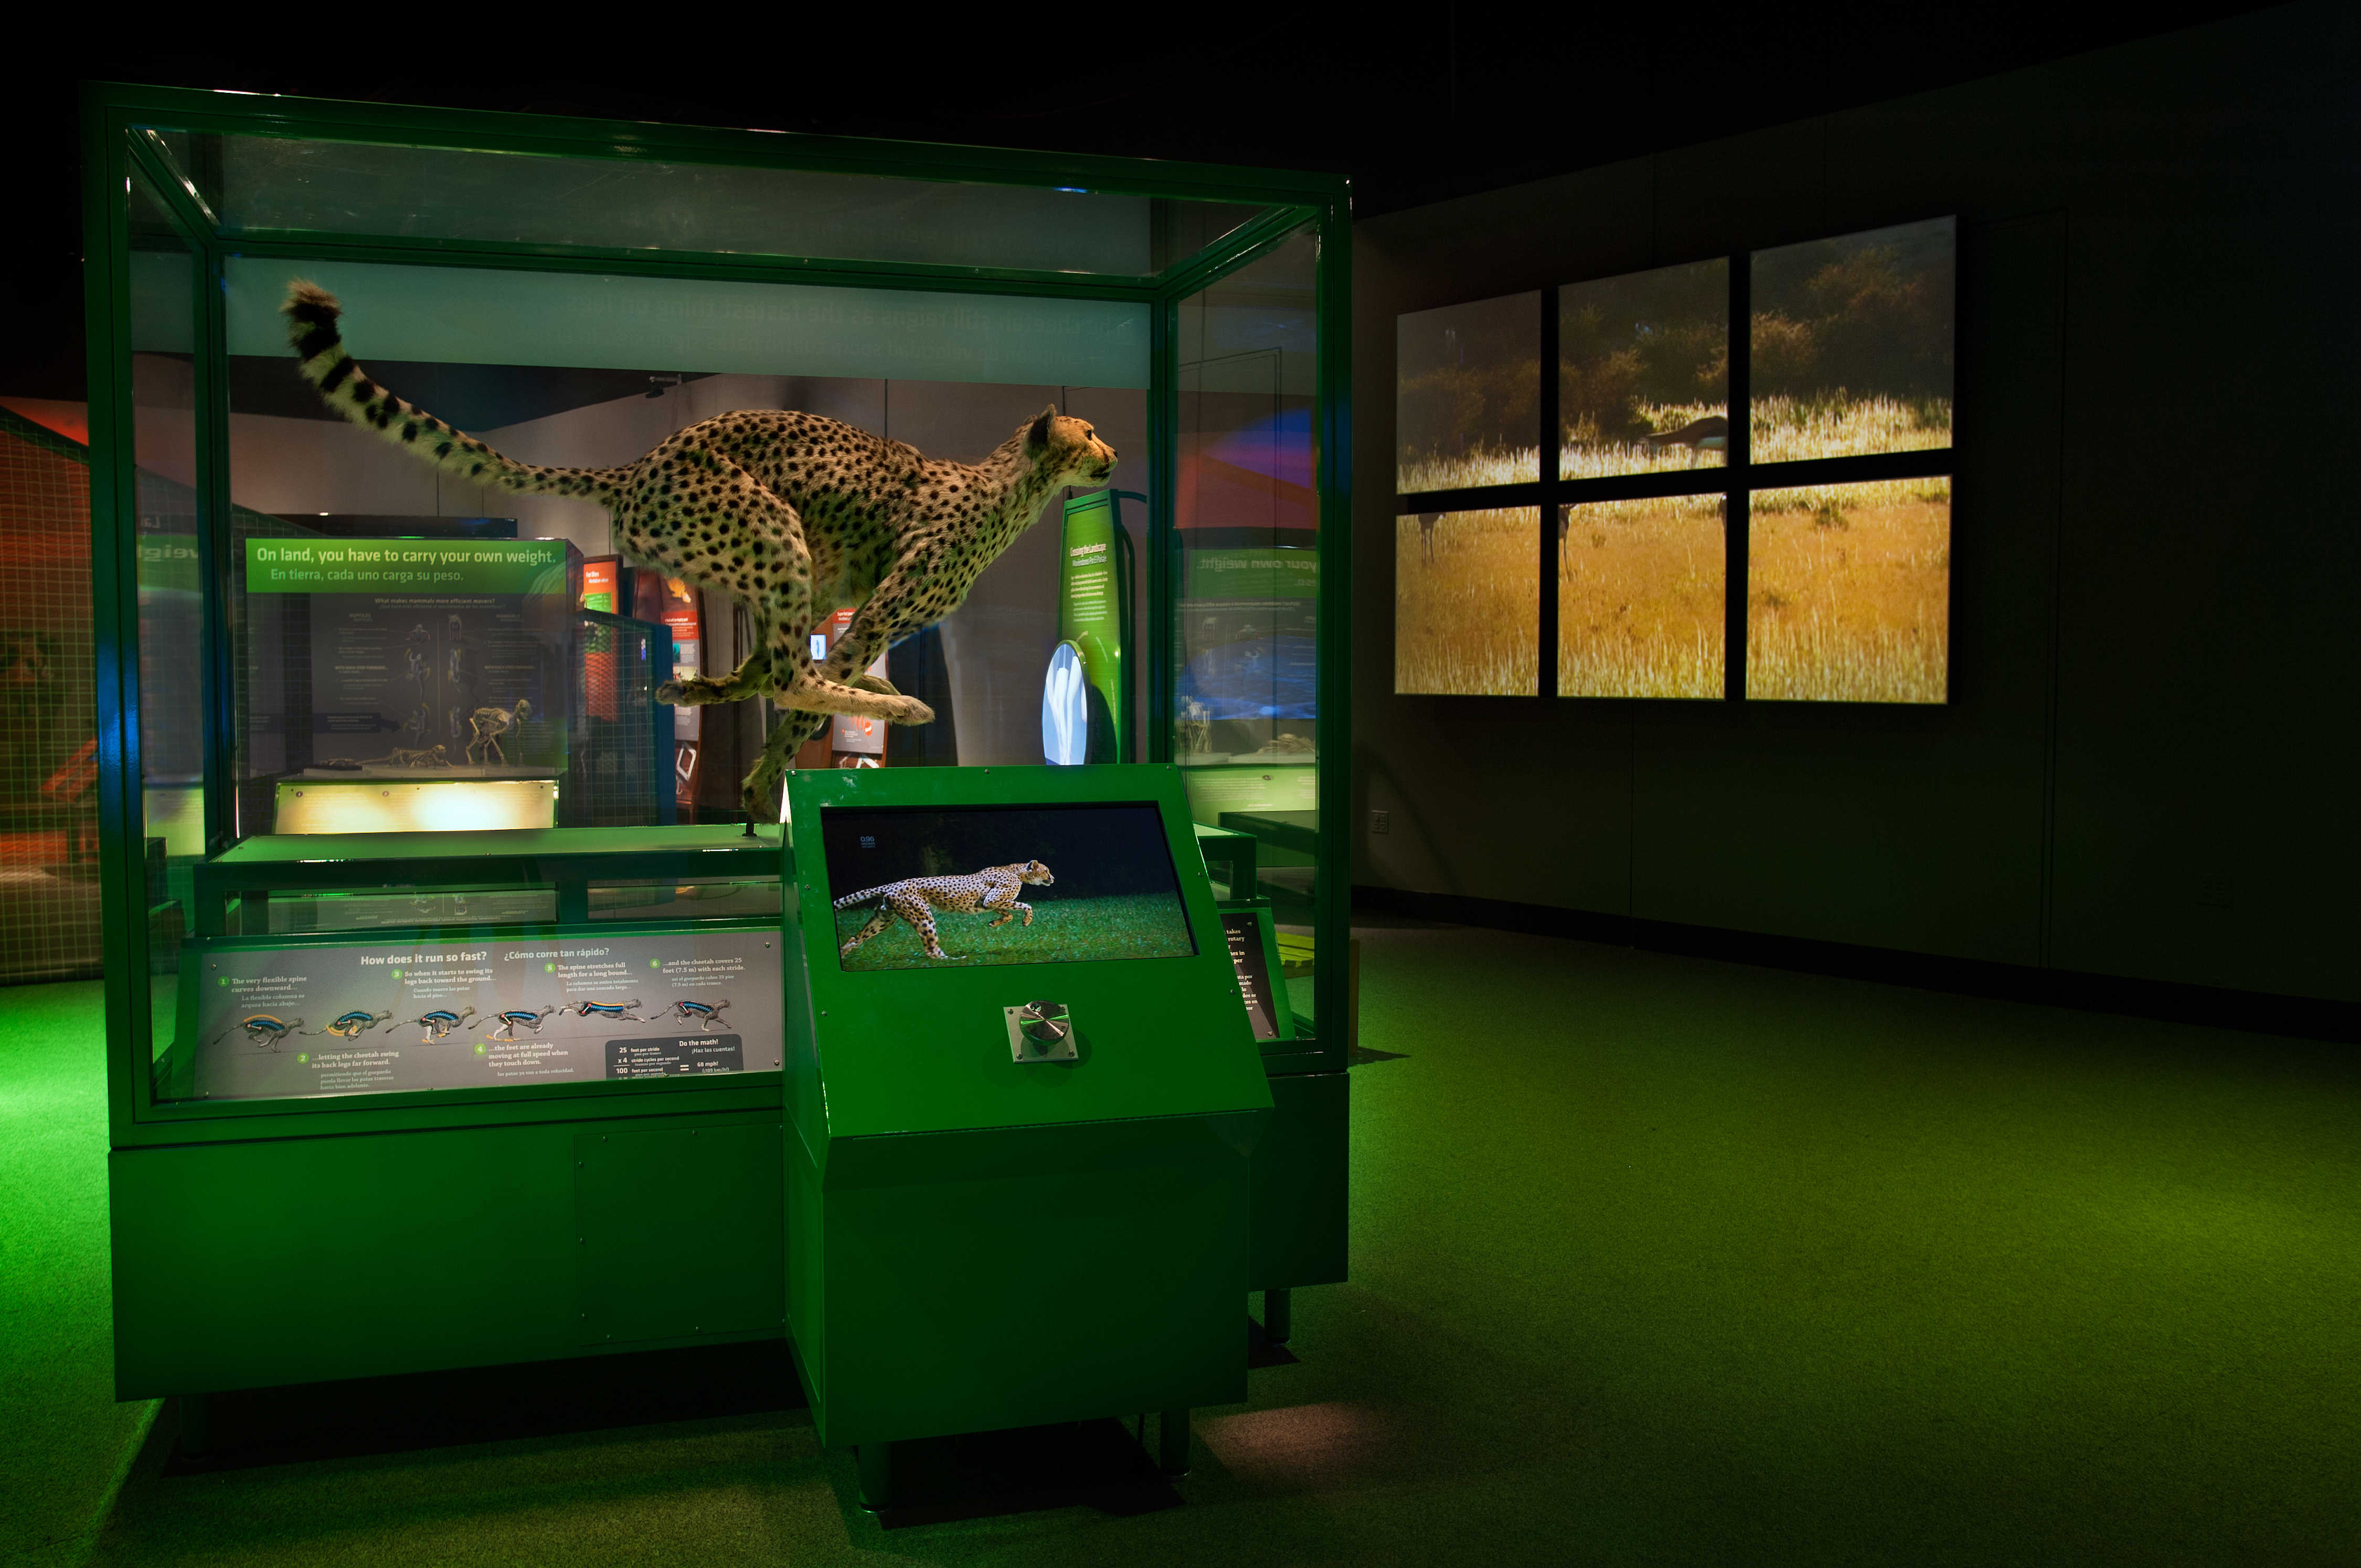 a section of Biomechanics exhibition featuring a cheetah in a running pose